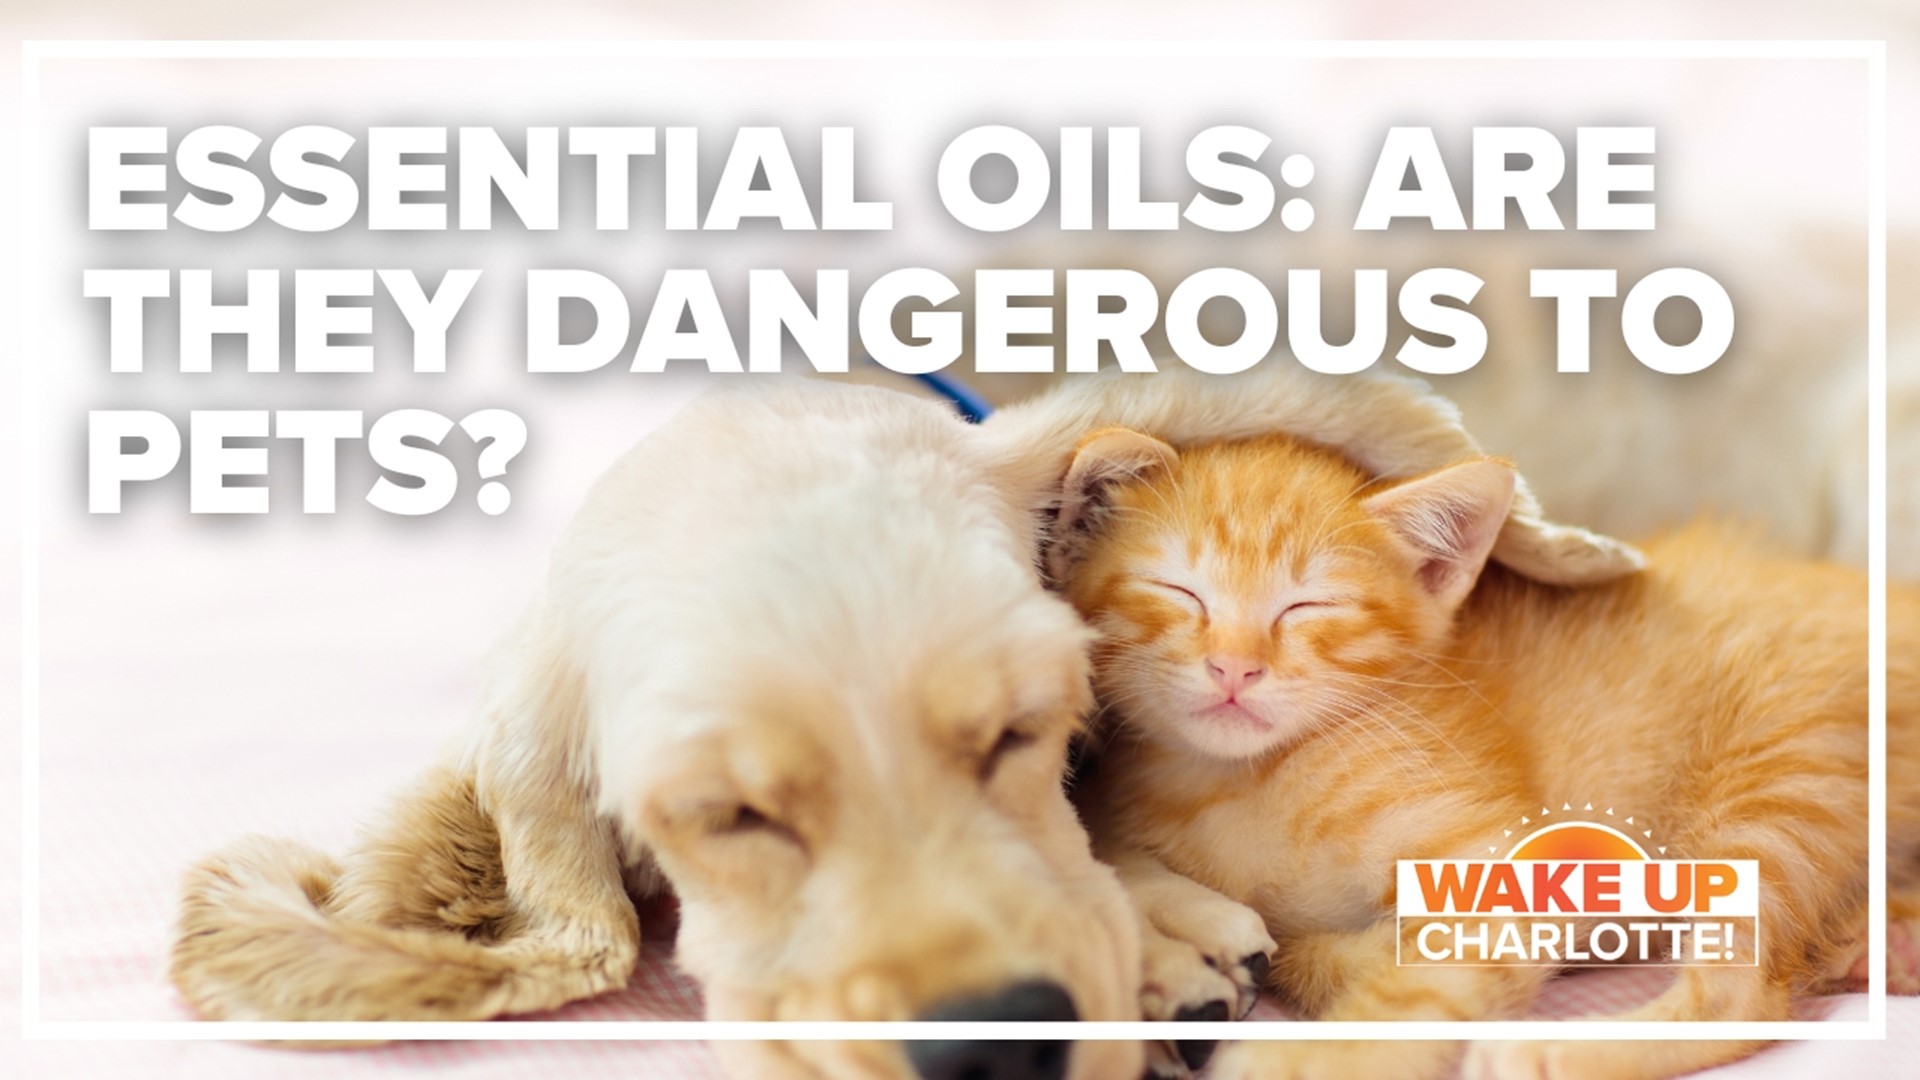 We verify a pet owner's claim on Facebook, warning   pet owners on how essential oils can be harmful to our pets.